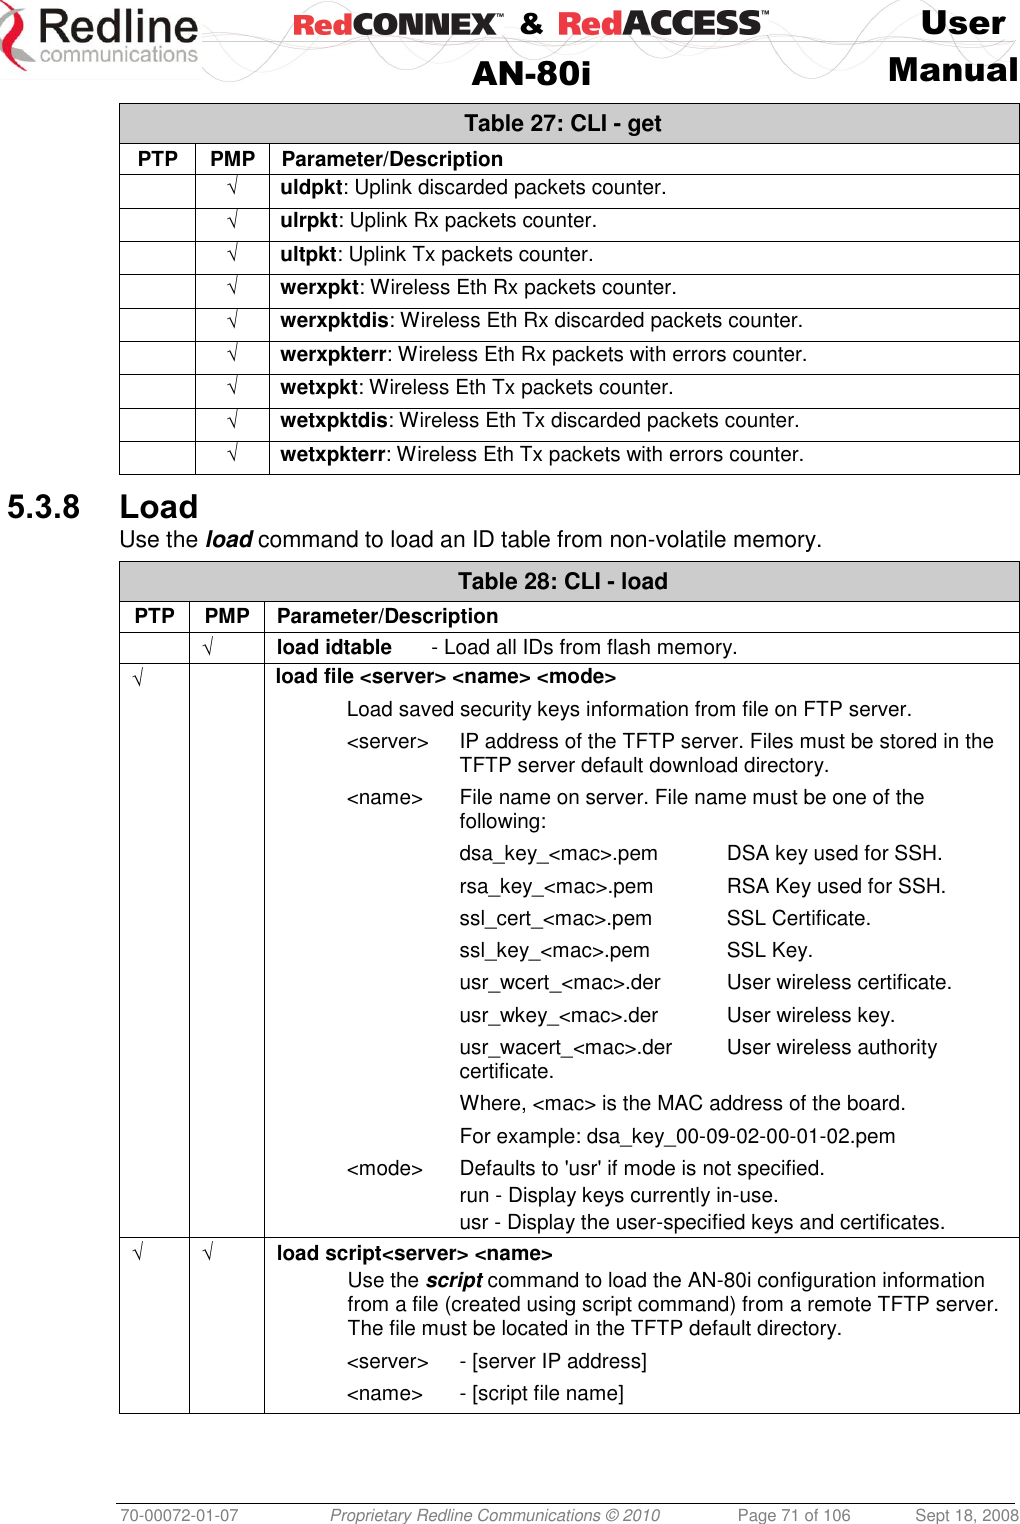    &amp;  User  AN-80i Manual  70-00072-01-07 Proprietary Redline Communications © 2010  Page 71 of 106  Sept 18, 2008 Table 27: CLI - get PTP PMP Parameter/Description  √ uldpkt: Uplink discarded packets counter.  √ ulrpkt: Uplink Rx packets counter.  √ ultpkt: Uplink Tx packets counter.  √ werxpkt: Wireless Eth Rx packets counter.  √ werxpktdis: Wireless Eth Rx discarded packets counter.  √ werxpkterr: Wireless Eth Rx packets with errors counter.  √ wetxpkt: Wireless Eth Tx packets counter.  √ wetxpktdis: Wireless Eth Tx discarded packets counter.  √ wetxpkterr: Wireless Eth Tx packets with errors counter. 5.3.8 Load Use the load command to load an ID table from non-volatile memory. Table 28: CLI - load PTP PMP Parameter/Description  √ load idtable   - Load all IDs from flash memory. √  load file &lt;server&gt; &lt;name&gt; &lt;mode&gt; Load saved security keys information from file on FTP server. &lt;server&gt;  IP address of the TFTP server. Files must be stored in the TFTP server default download directory. &lt;name&gt;  File name on server. File name must be one of the following: dsa_key_&lt;mac&gt;.pem  DSA key used for SSH. rsa_key_&lt;mac&gt;.pem  RSA Key used for SSH. ssl_cert_&lt;mac&gt;.pem  SSL Certificate. ssl_key_&lt;mac&gt;.pem  SSL Key. usr_wcert_&lt;mac&gt;.der  User wireless certificate. usr_wkey_&lt;mac&gt;.der  User wireless key. usr_wacert_&lt;mac&gt;.der  User wireless authority certificate. Where, &lt;mac&gt; is the MAC address of the board. For example: dsa_key_00-09-02-00-01-02.pem &lt;mode&gt;  Defaults to &apos;usr&apos; if mode is not specified.   run - Display keys currently in-use.   usr - Display the user-specified keys and certificates. √ √ load script&lt;server&gt; &lt;name&gt; Use the script command to load the AN-80i configuration information from a file (created using script command) from a remote TFTP server. The file must be located in the TFTP default directory. &lt;server&gt;  - [server IP address] &lt;name&gt;  - [script file name]  